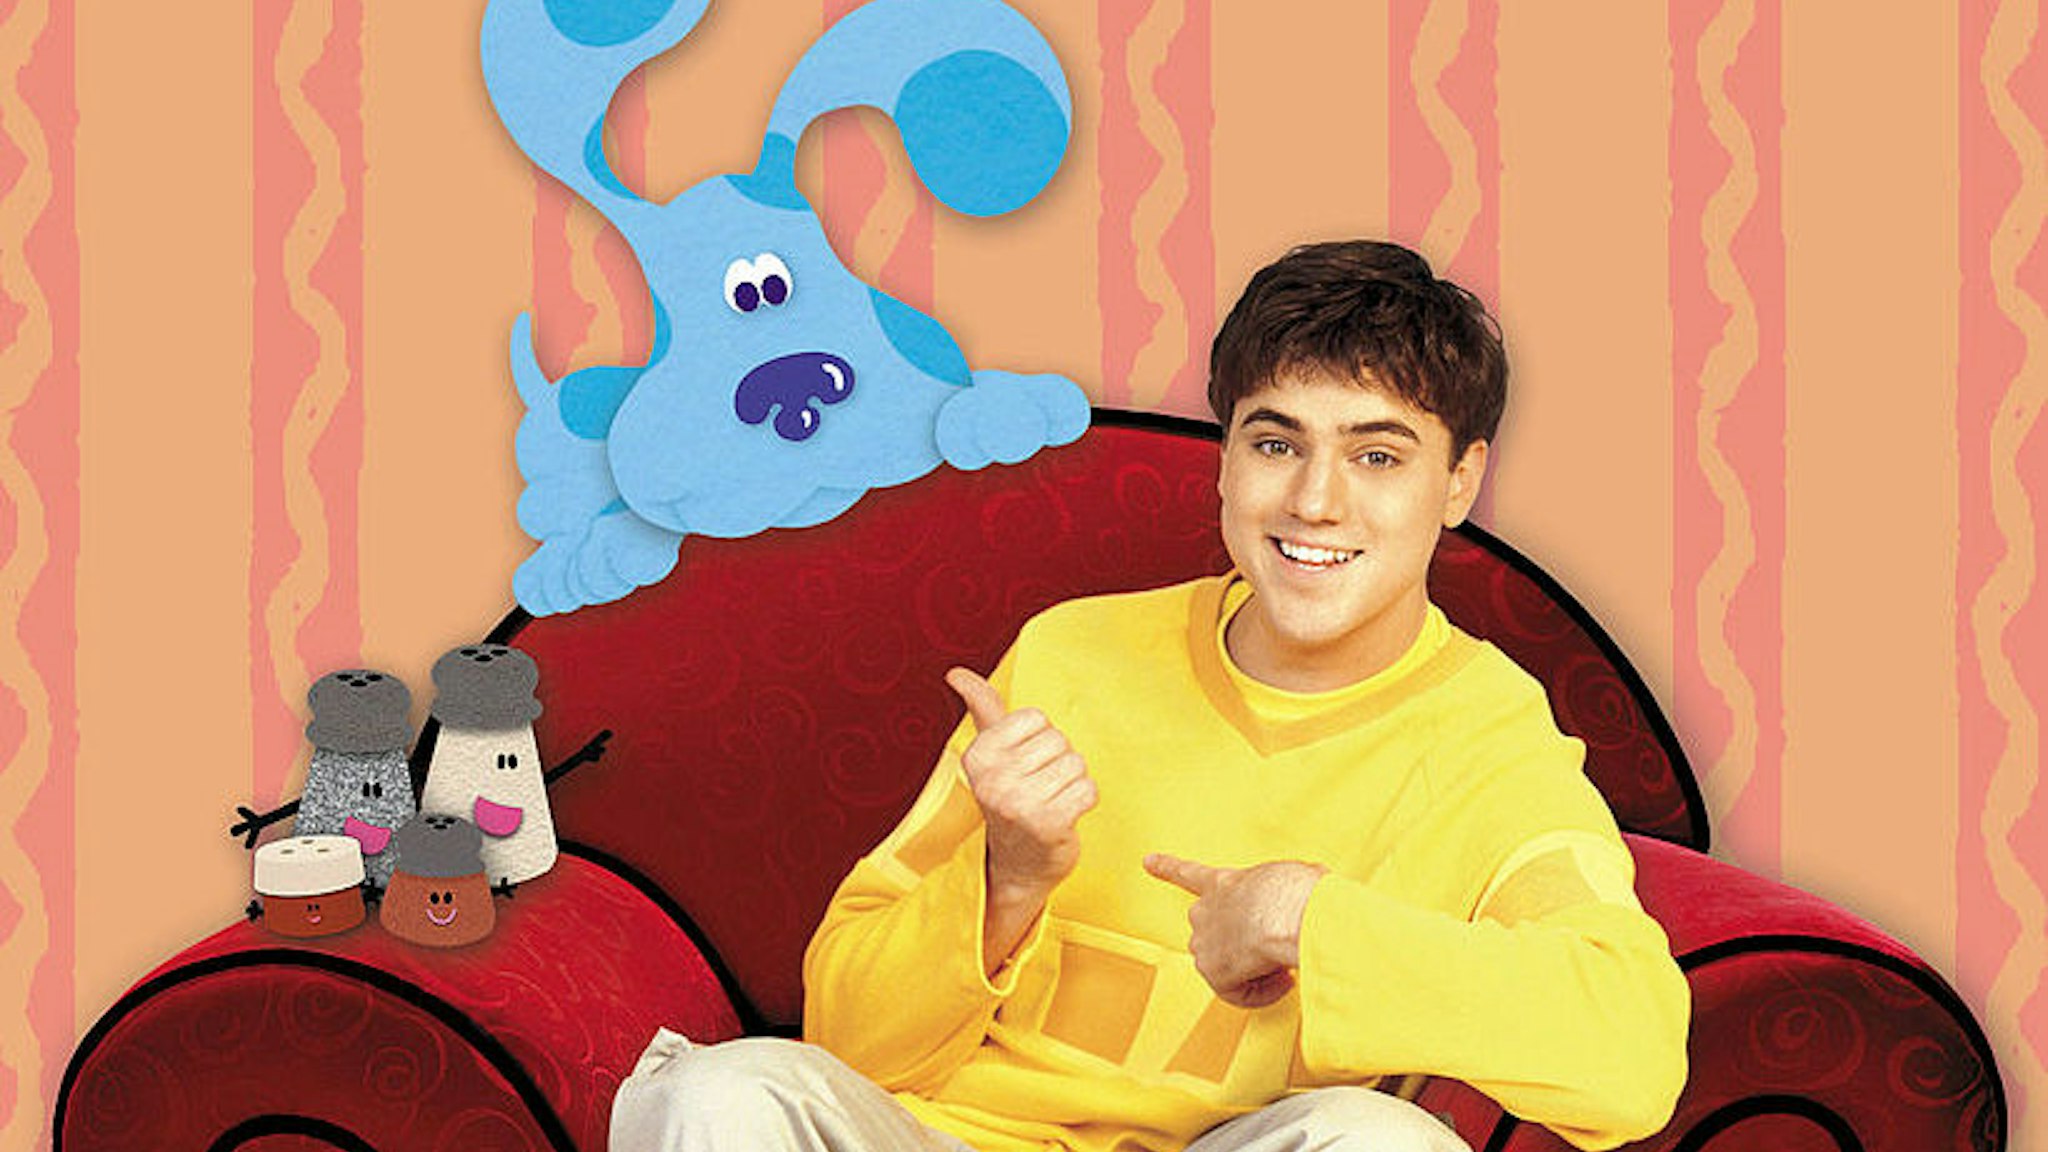 404656 01: Actor Donovan Patton Appears With Blue, His Animated Co-Star On The Set Of Nickelodeon's "Blue's Clues," In This Computer-Generated Composite Publicity Image. Donovan Is Replacing Steve Burns, The Show's Host Since The Children's Show Debuted In December 1996. (Photo By Getty Images)